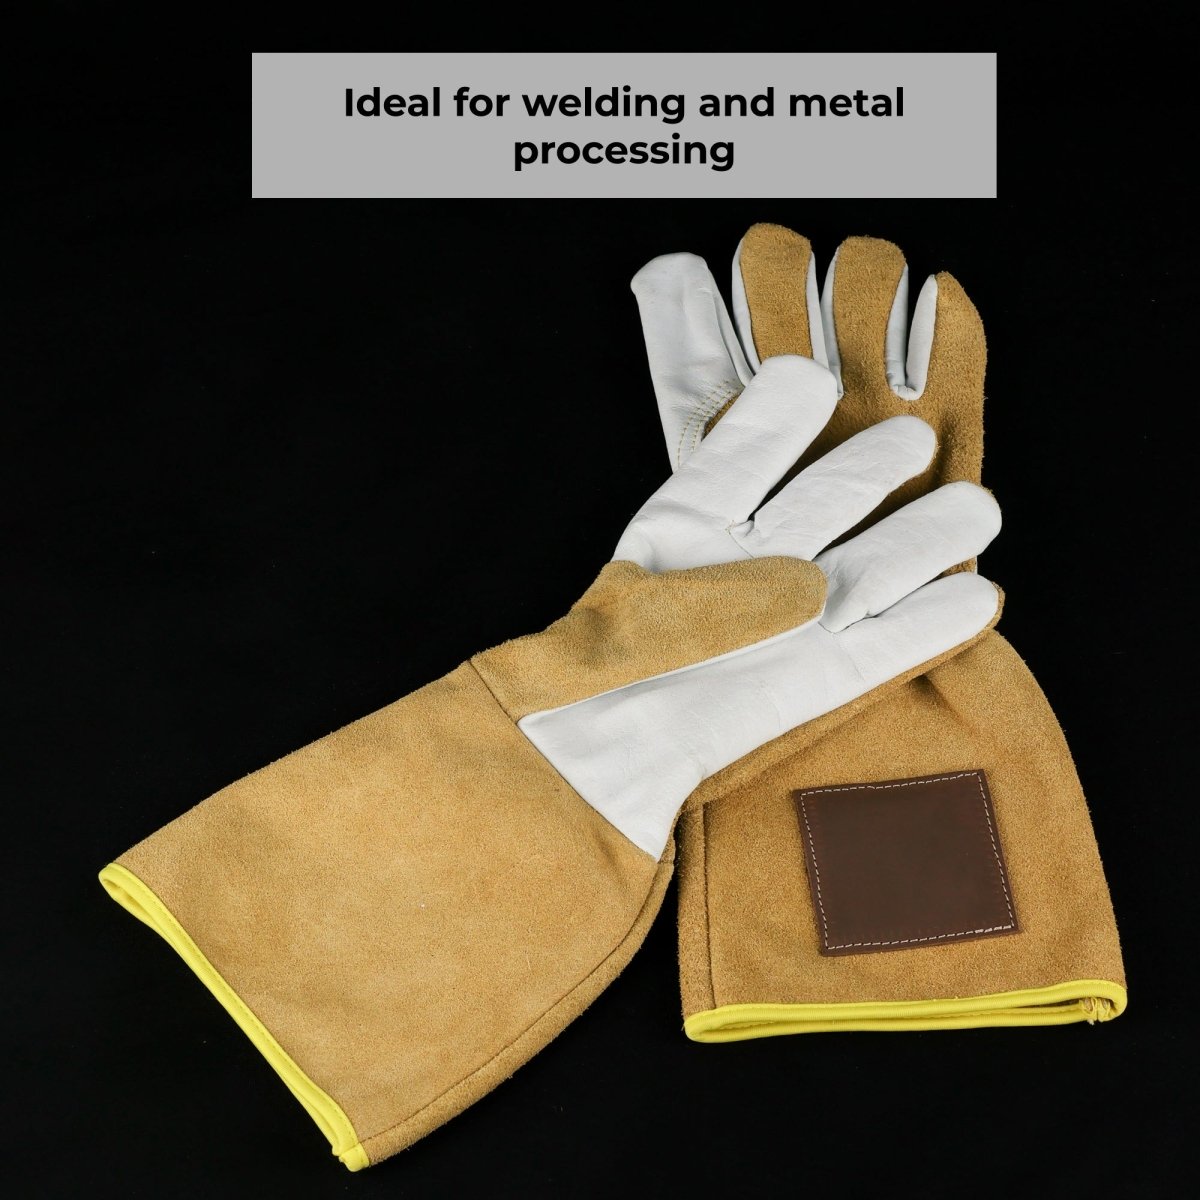 Fire resistant leather gloves for artisans - Blacksmith and welding gloves from AncientSmithy